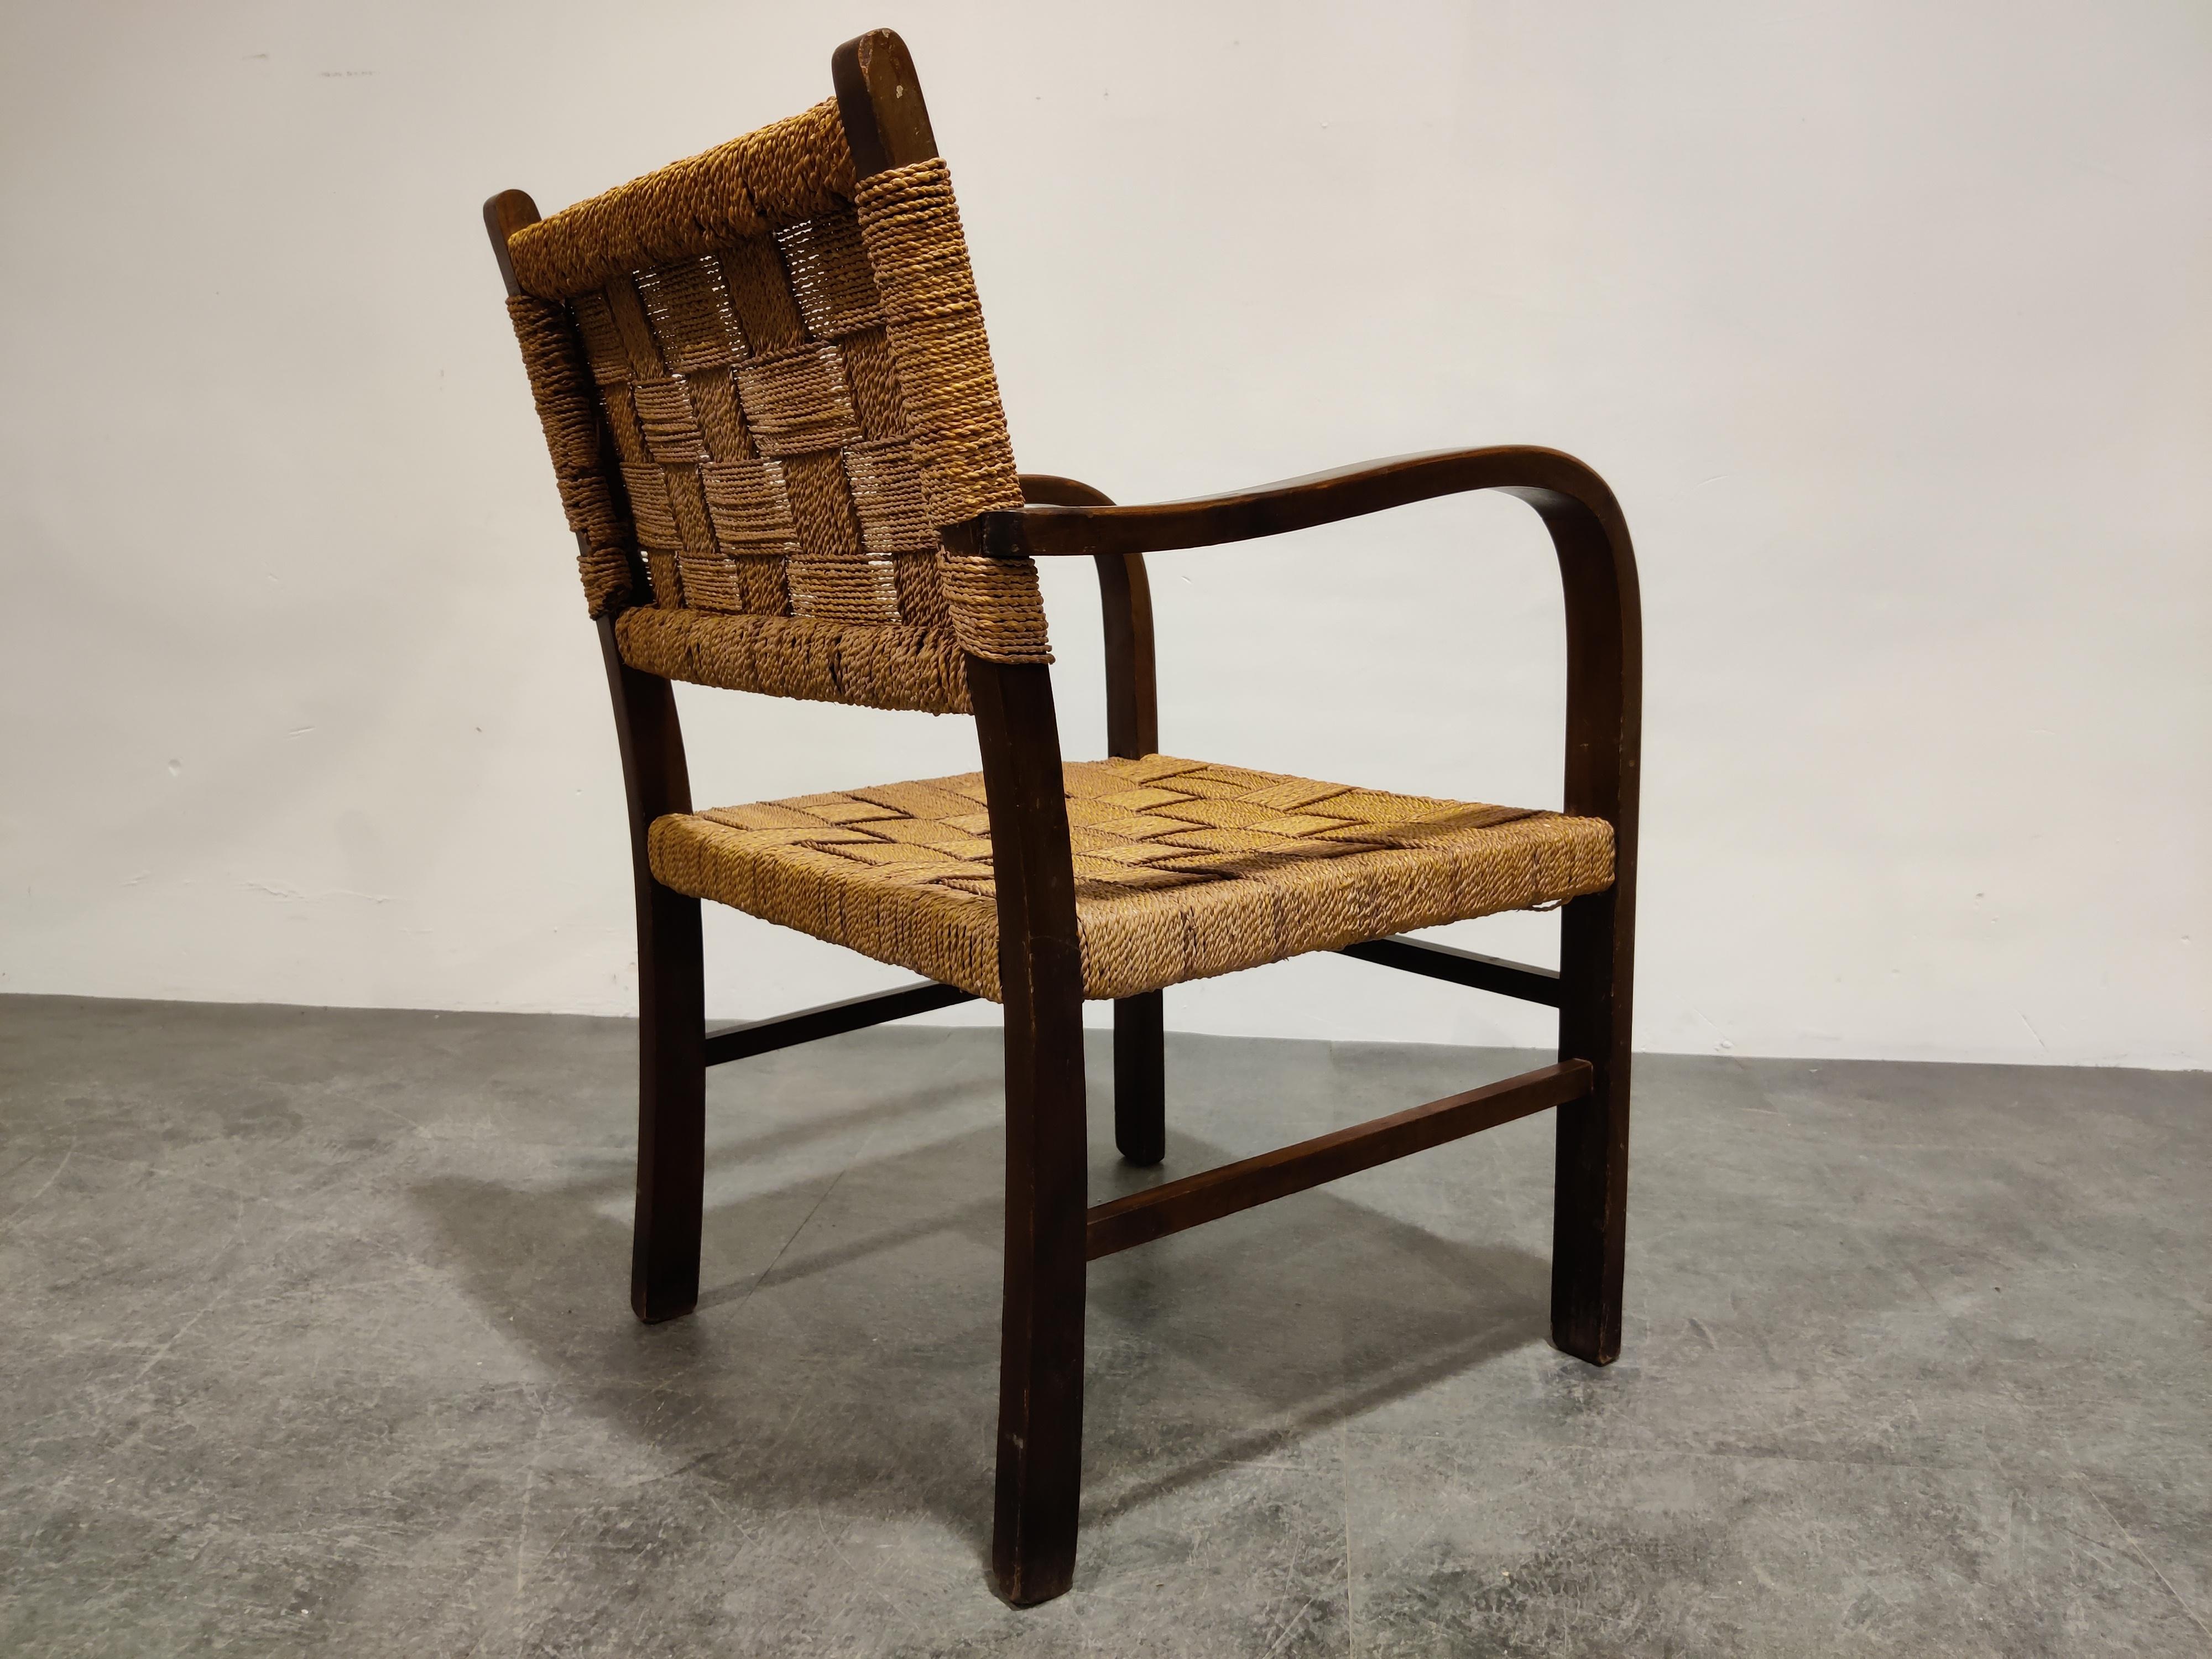 Charming midcentury - Art Deco style armchair made from braided cord.

Good original condition.

Beautiful design and the cord gives the piece an attractive colour

The chair is in good condition.

1950s - The